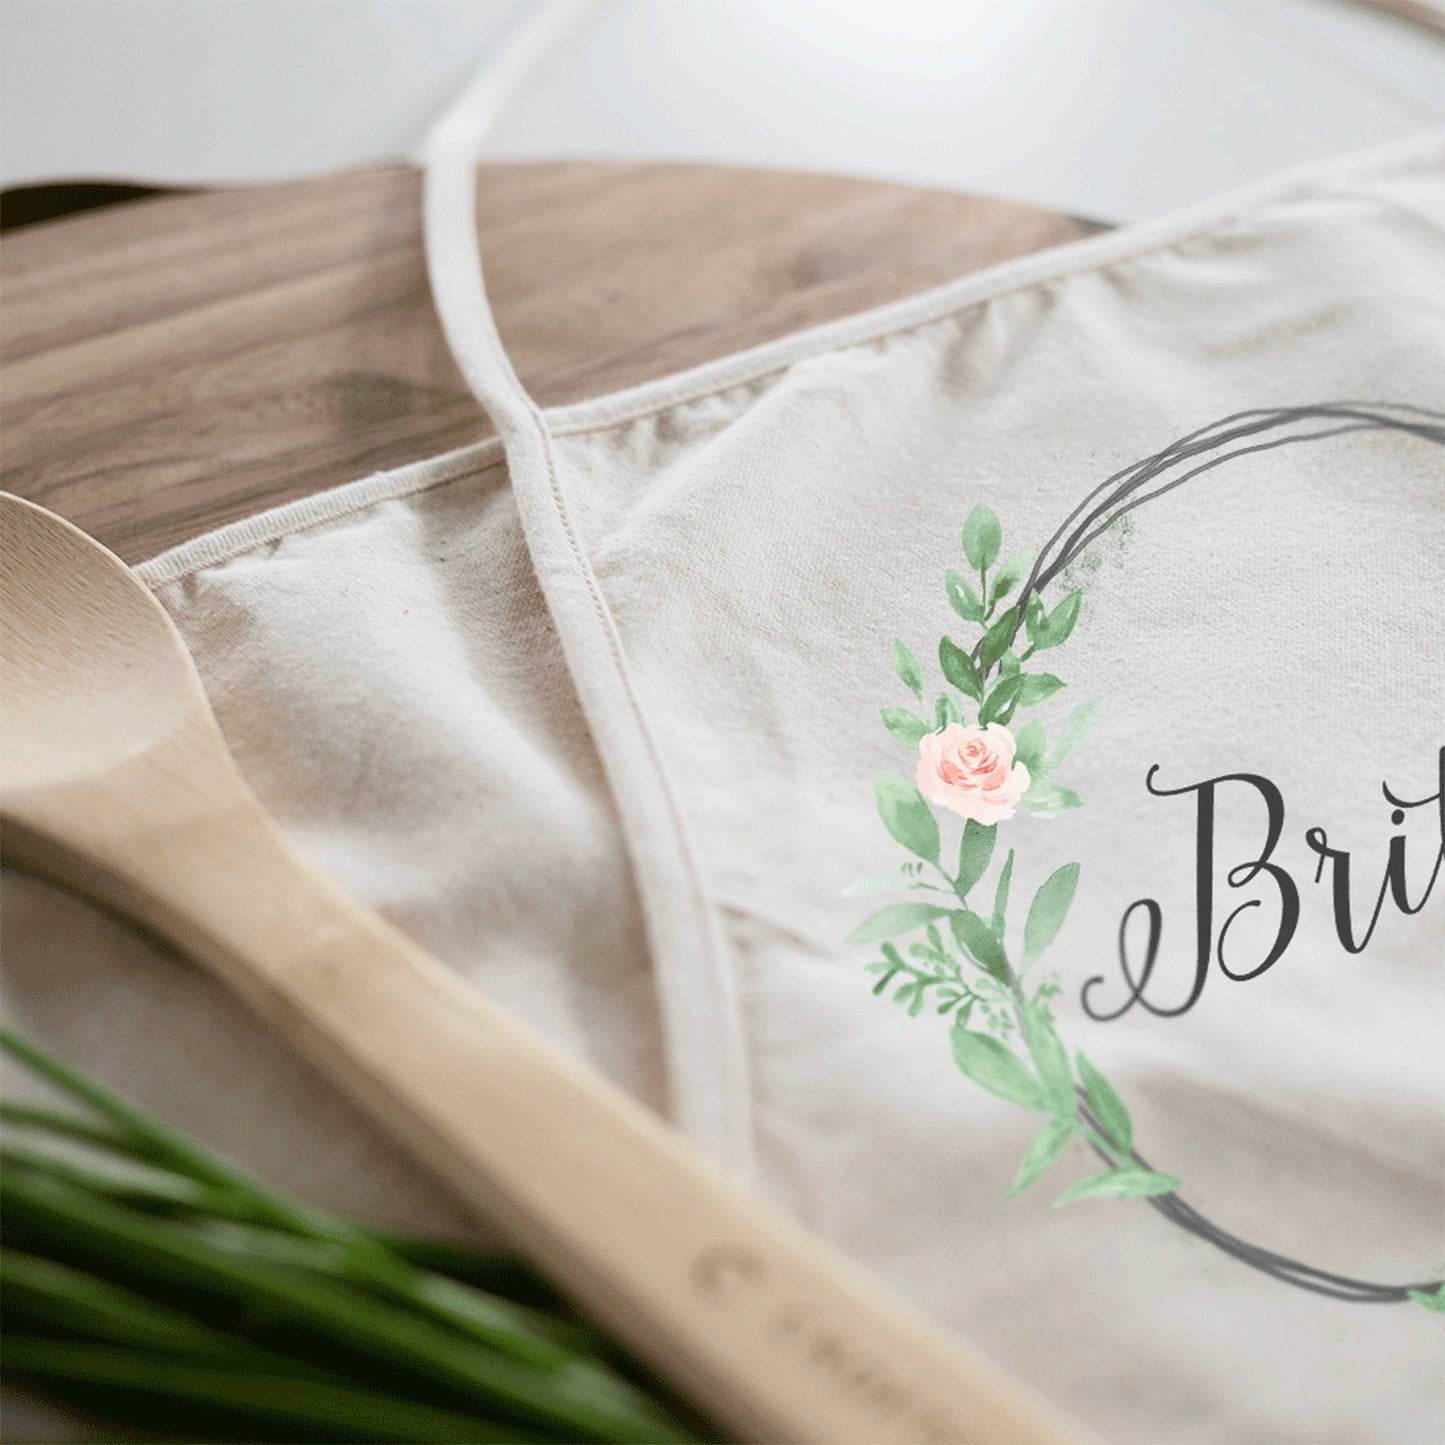 Load image into Gallery viewer, Personalized Apron For Mom | Kitchen Apron | Custom Apron | Floral Wreath | Custom Monogram Apron | Cotton Canvas Full Apron | Gift for Mom
